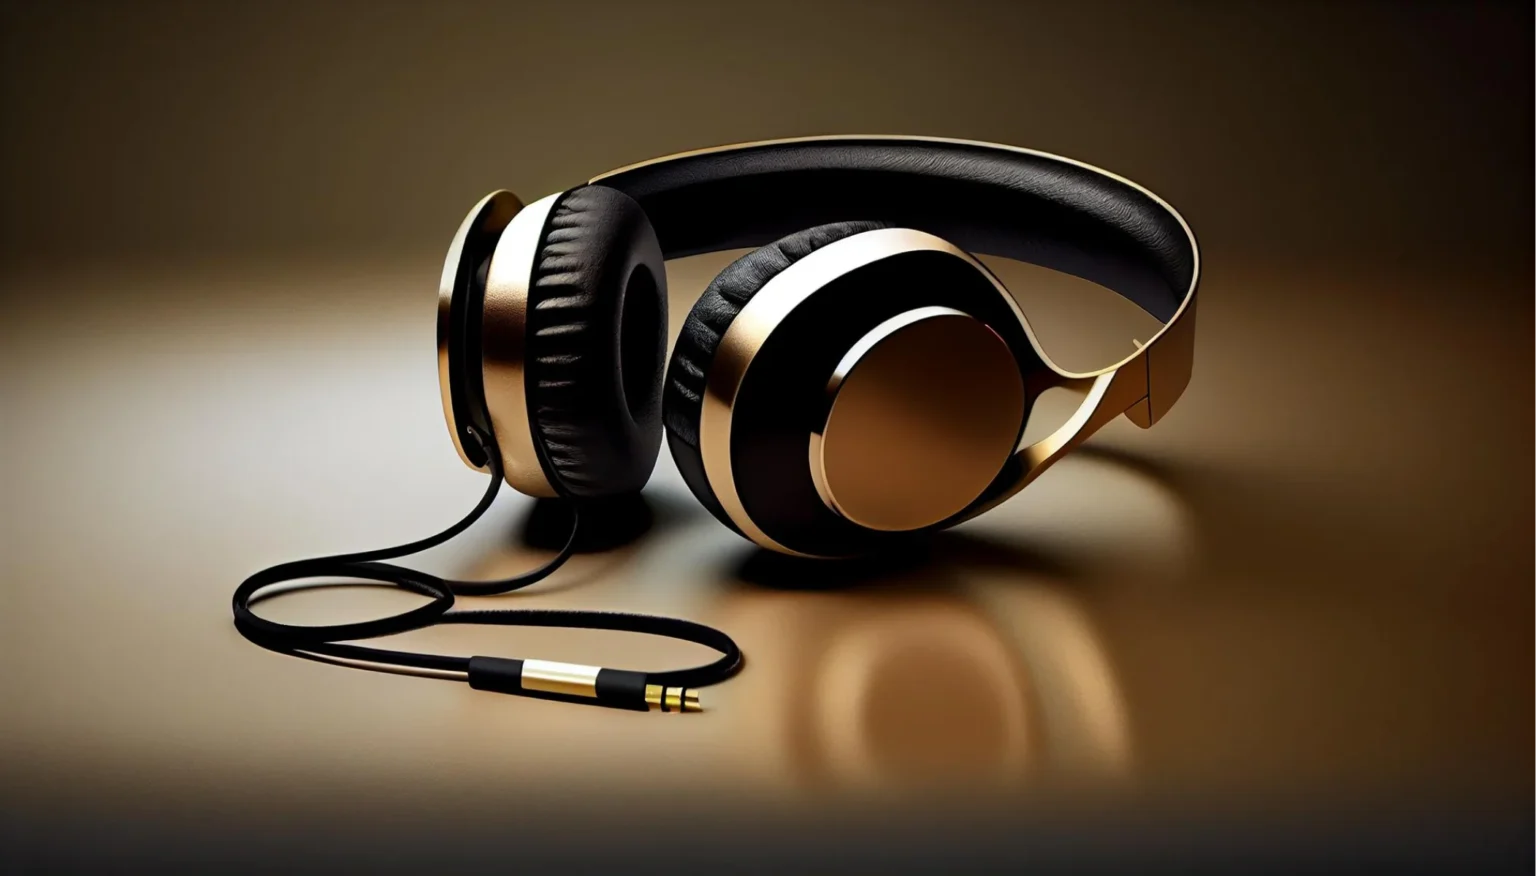 High-end CGI headphones product photography guide